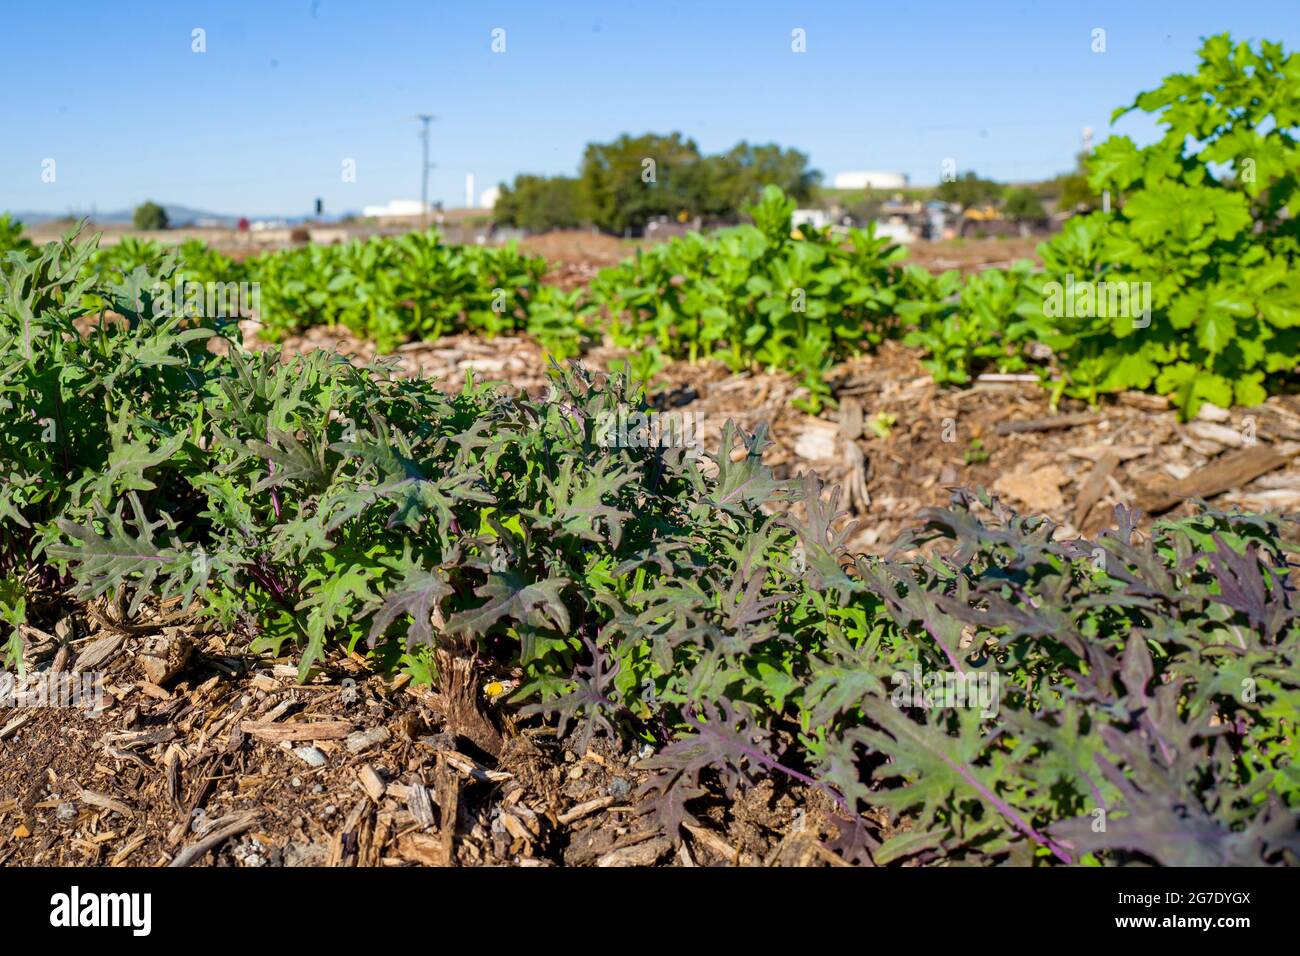 Plants and equipment are visible at CoCo San Sustainable Farm, an experimental farm which uses recycled water to grow plants for local schools in Martinez, California, January 24, 2019. () Stock Photo